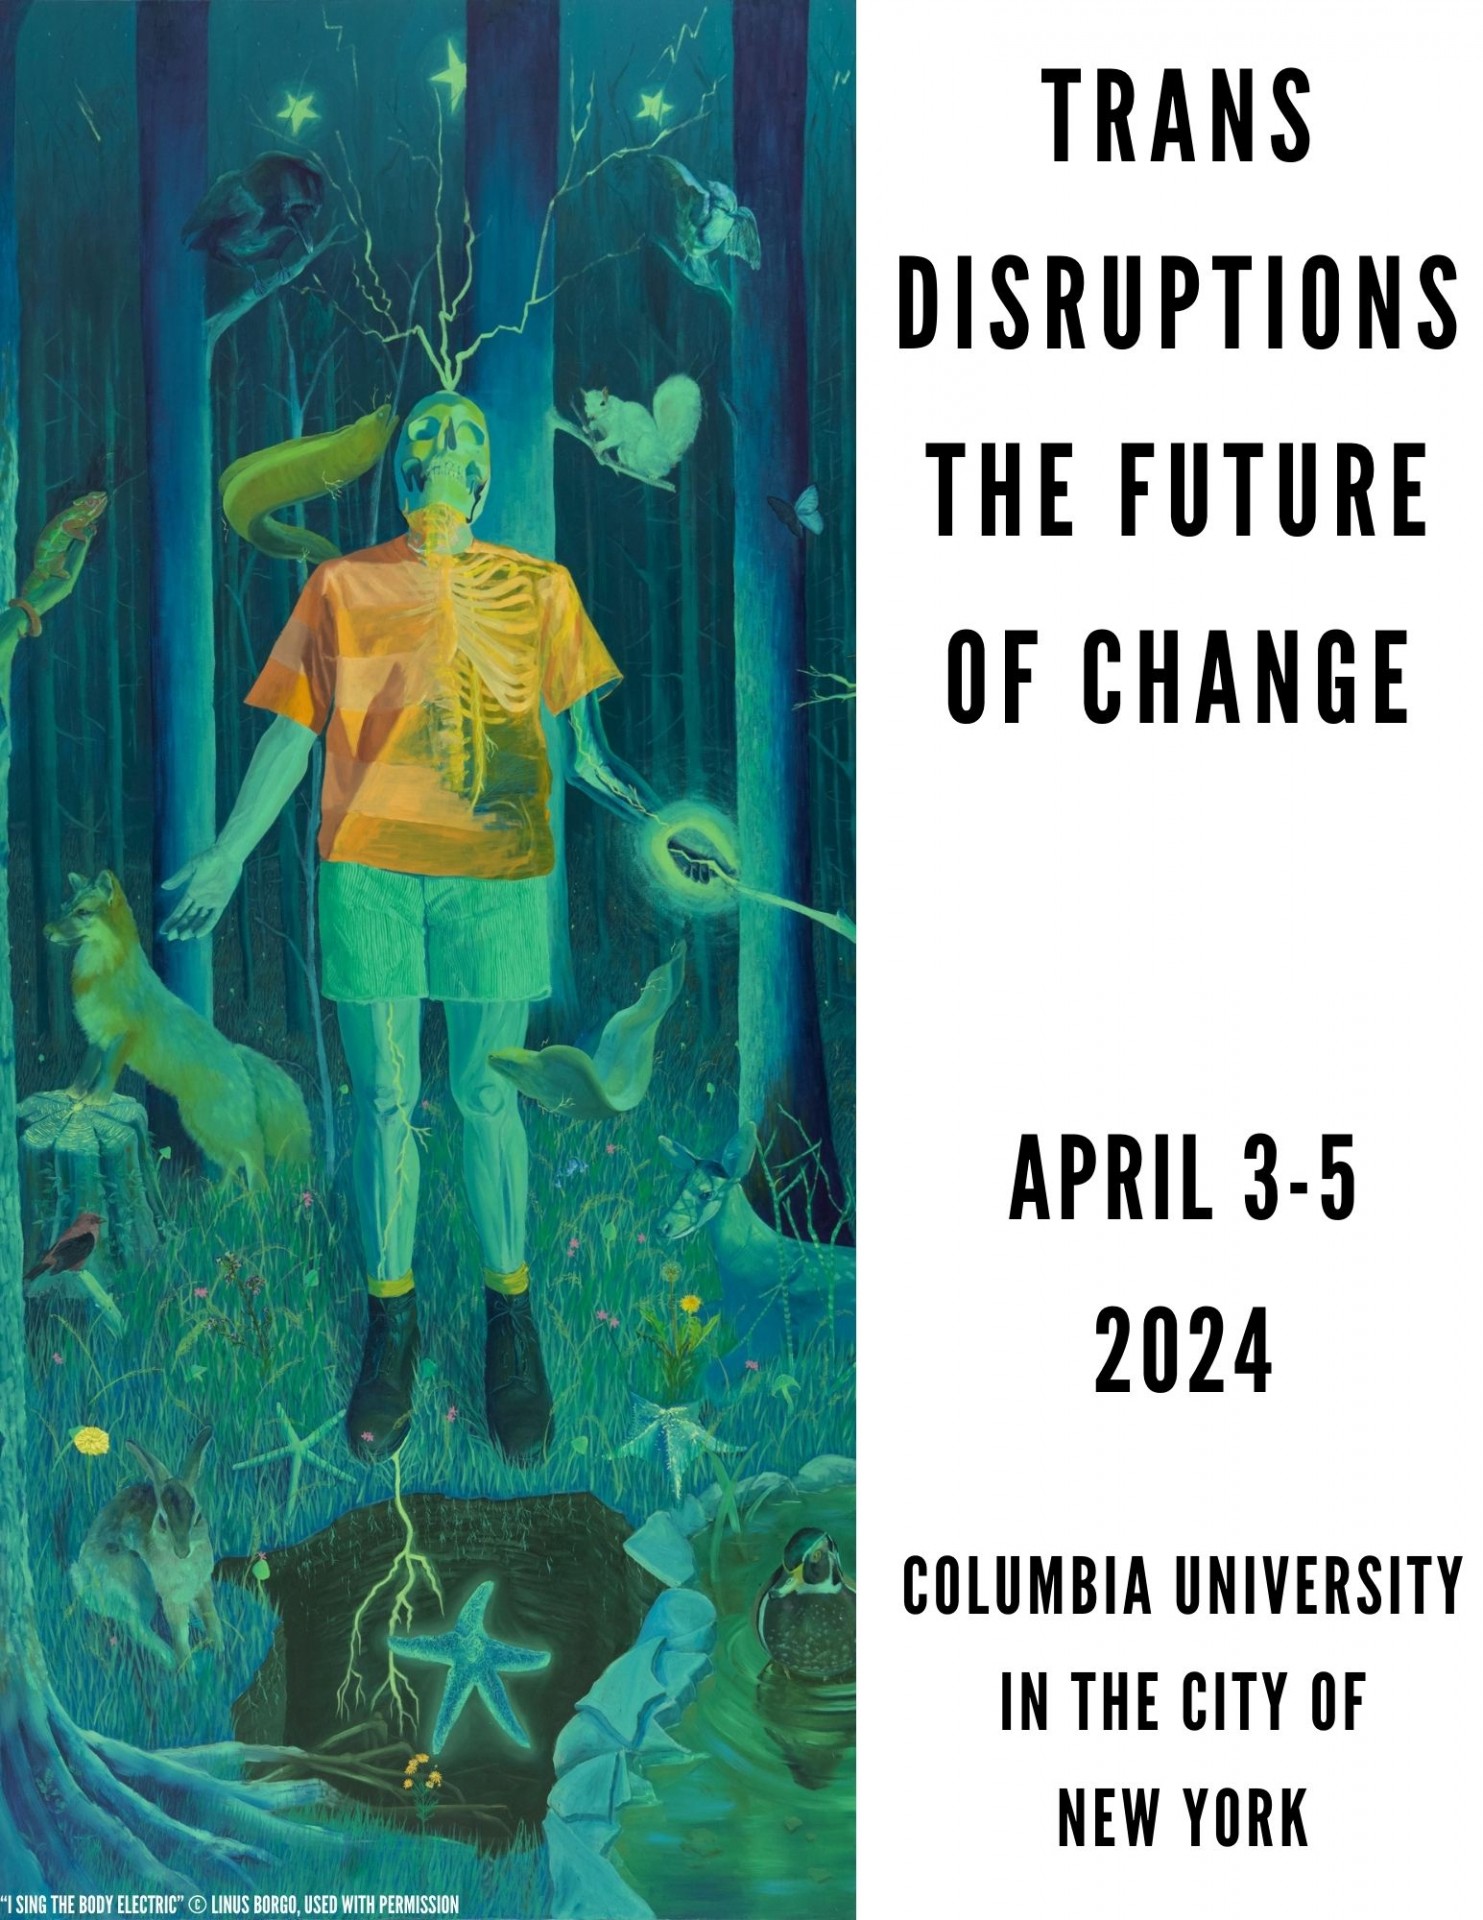 Trans Disruptions: The Future of Change